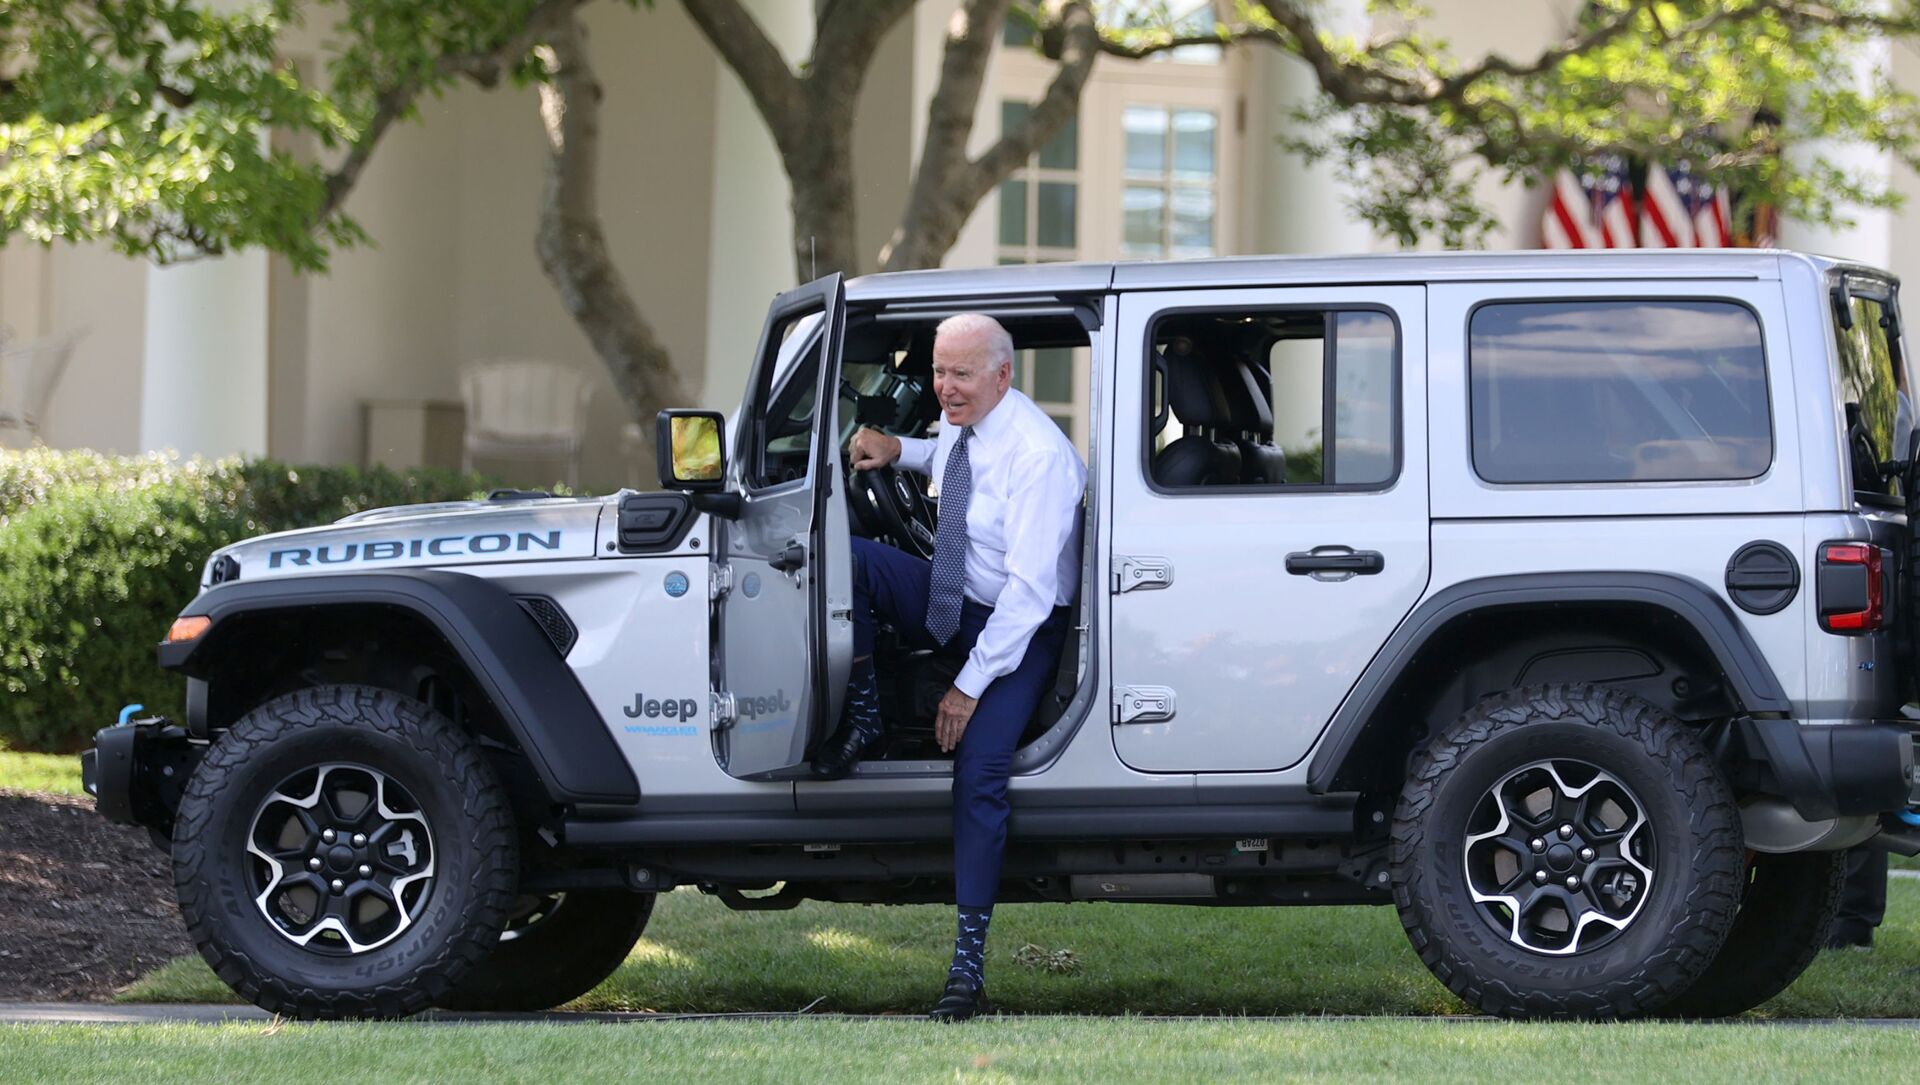 U.S. President Joe Biden hops out after test driving a Jeep Wrangler 4xe Rubicon during an event for clean cars and trucks, and signs an executive order on transformaing the country’s auto fleet at the White House in Washington, U.S. August 5, 2021. - Sputnik International, 1920, 05.08.2021